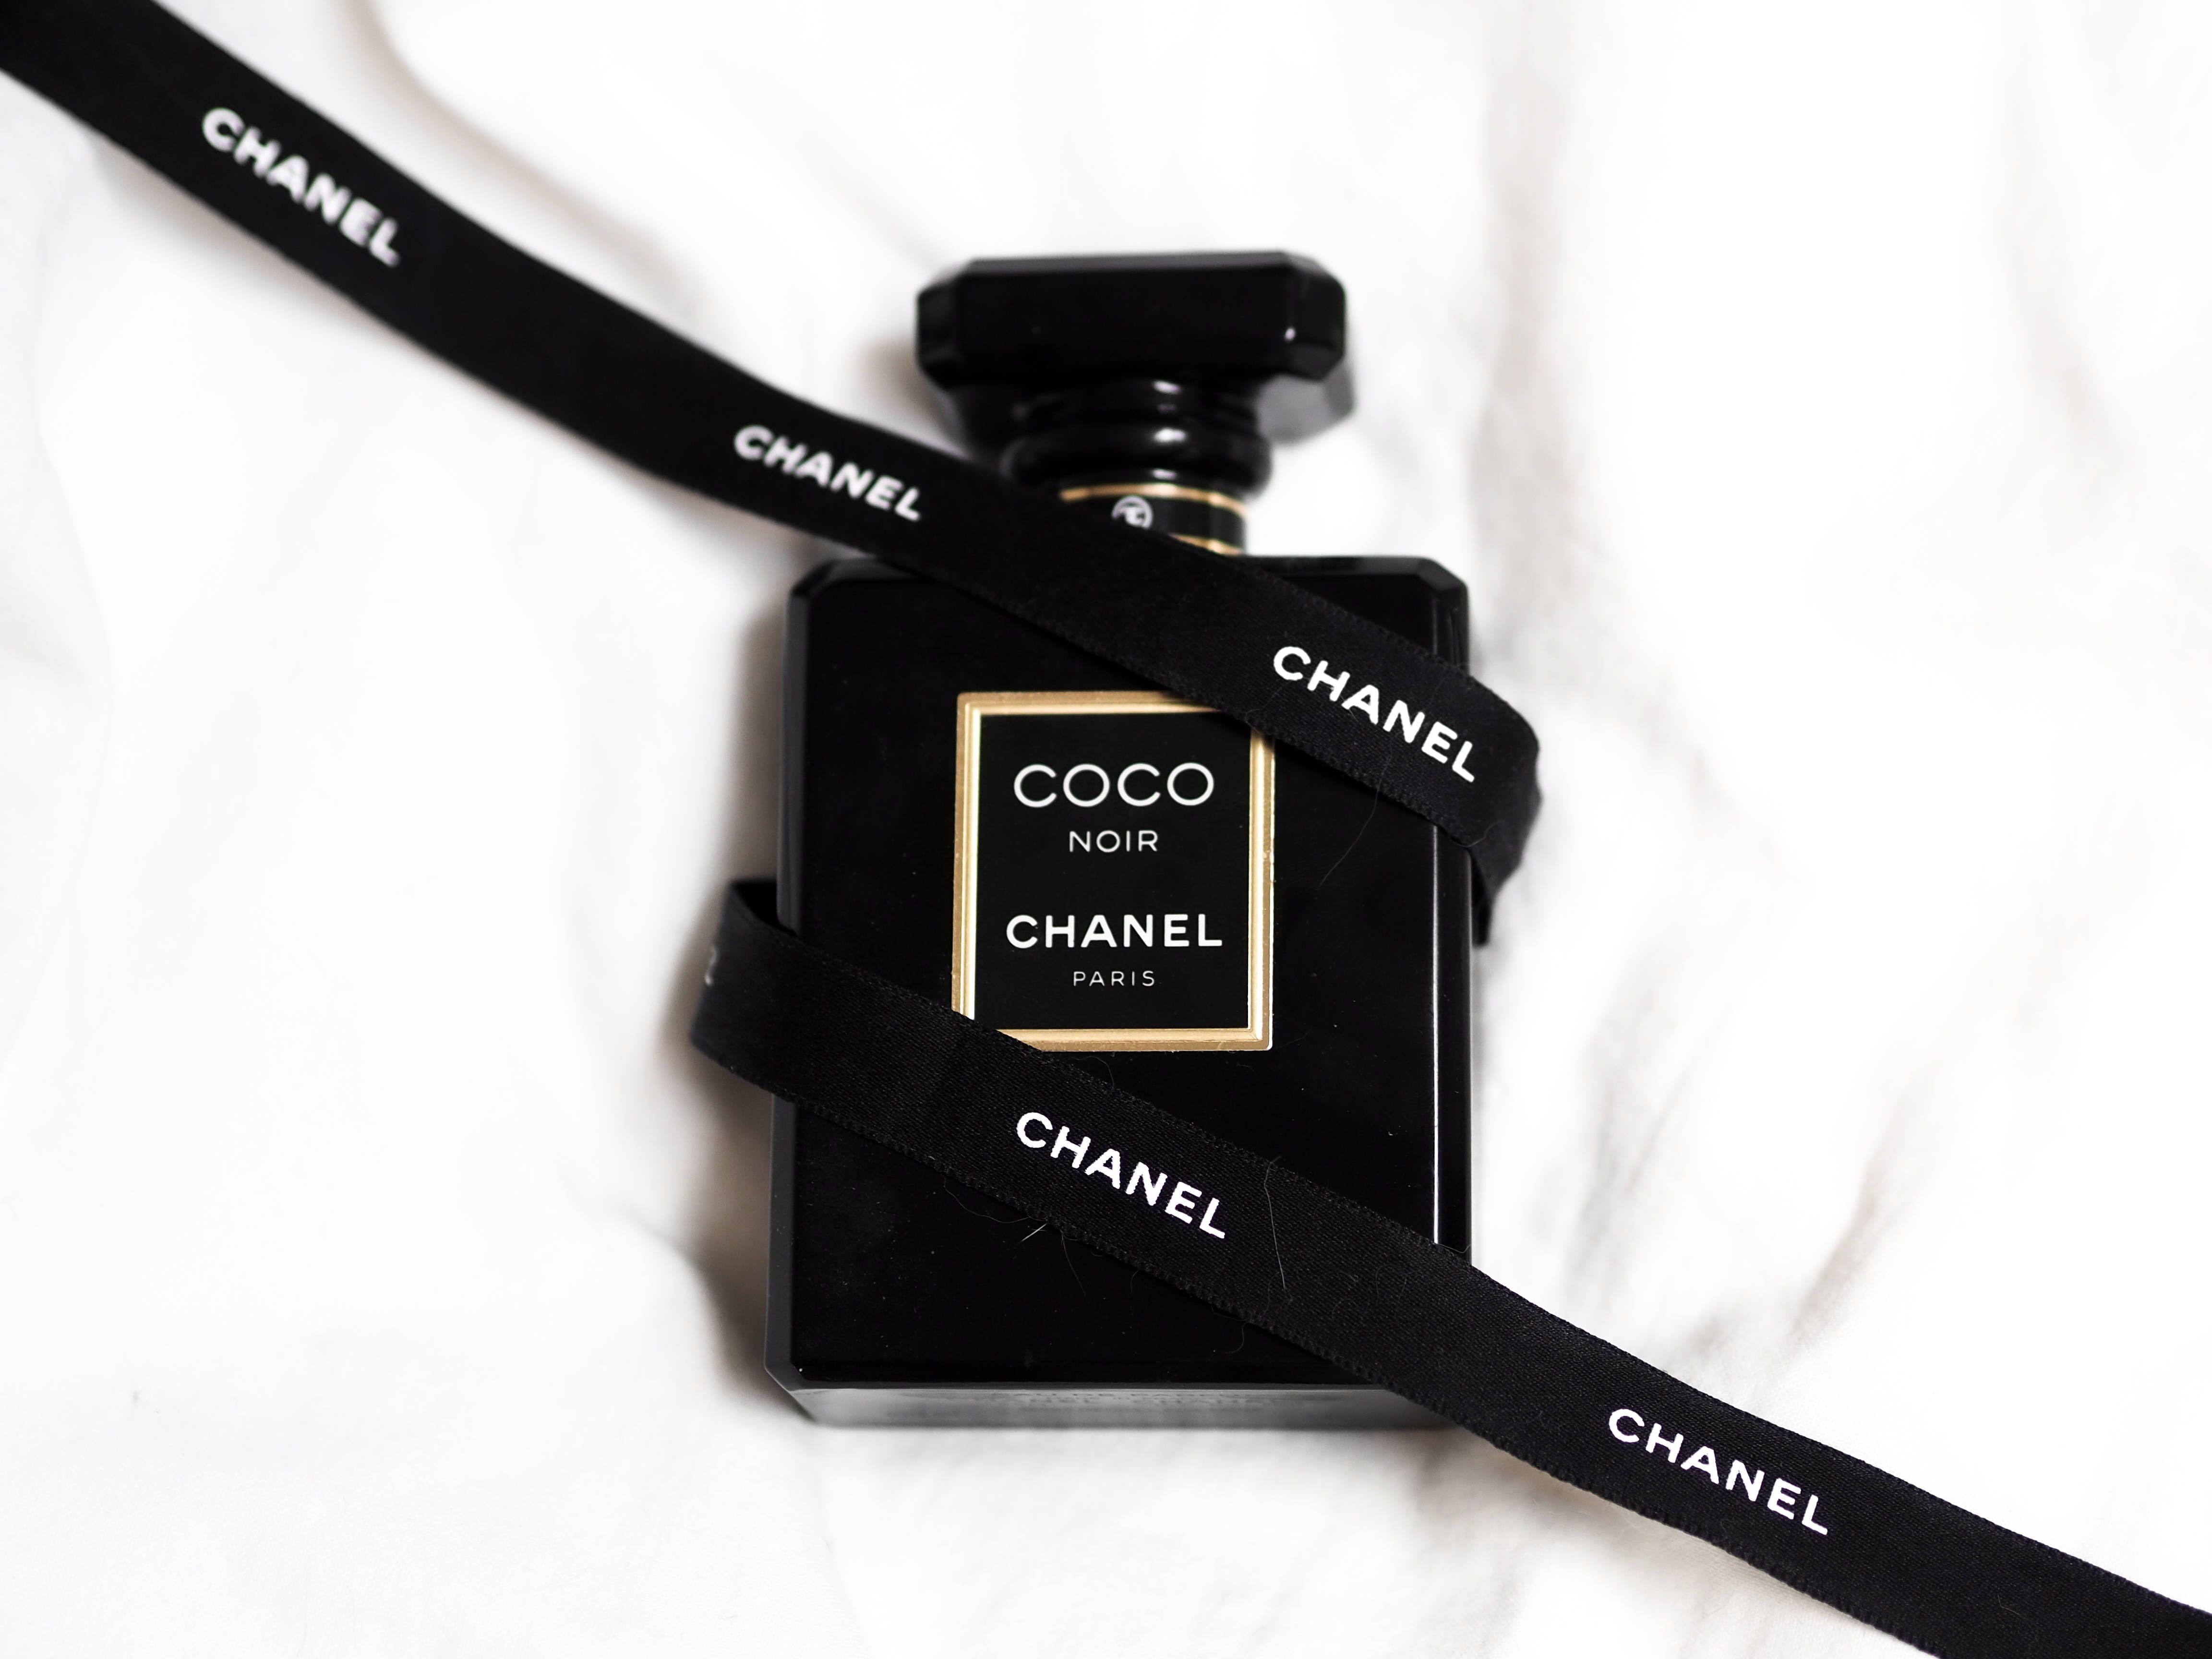 A bottle of Chanel perfume on a white background - Chanel